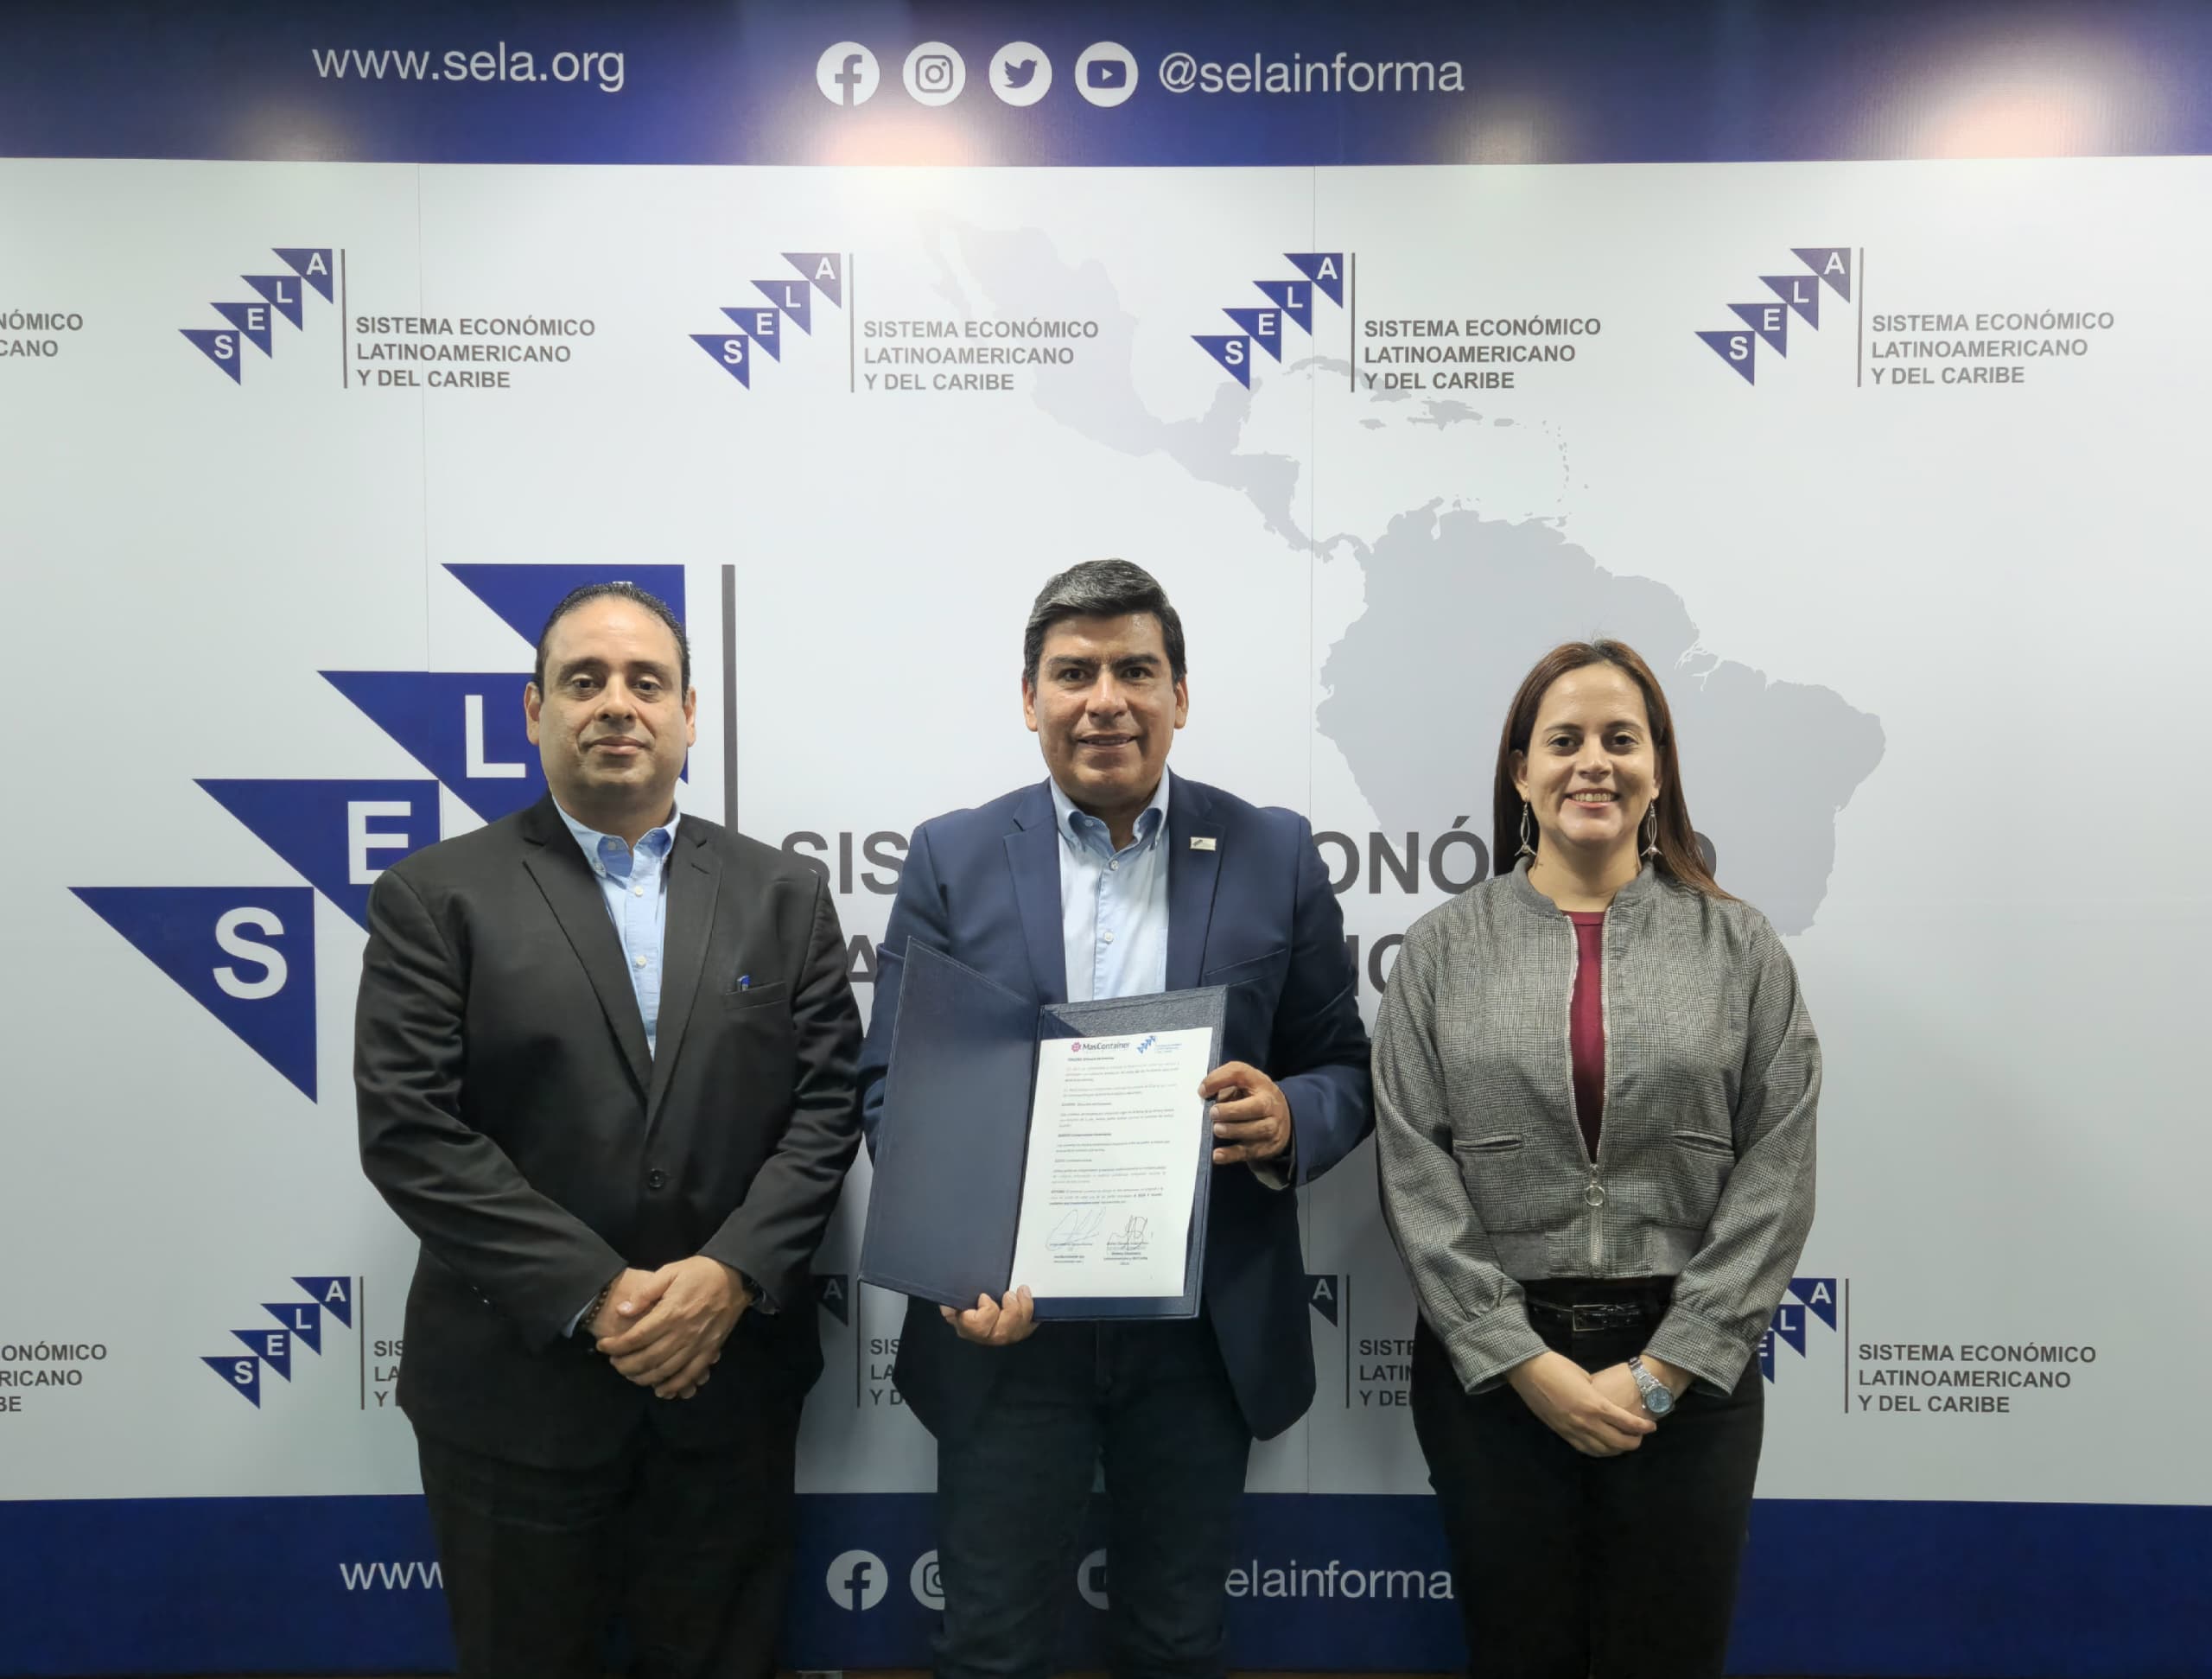 SELA and MasContainer sign agreement for the promotion of international trade and logistics activities